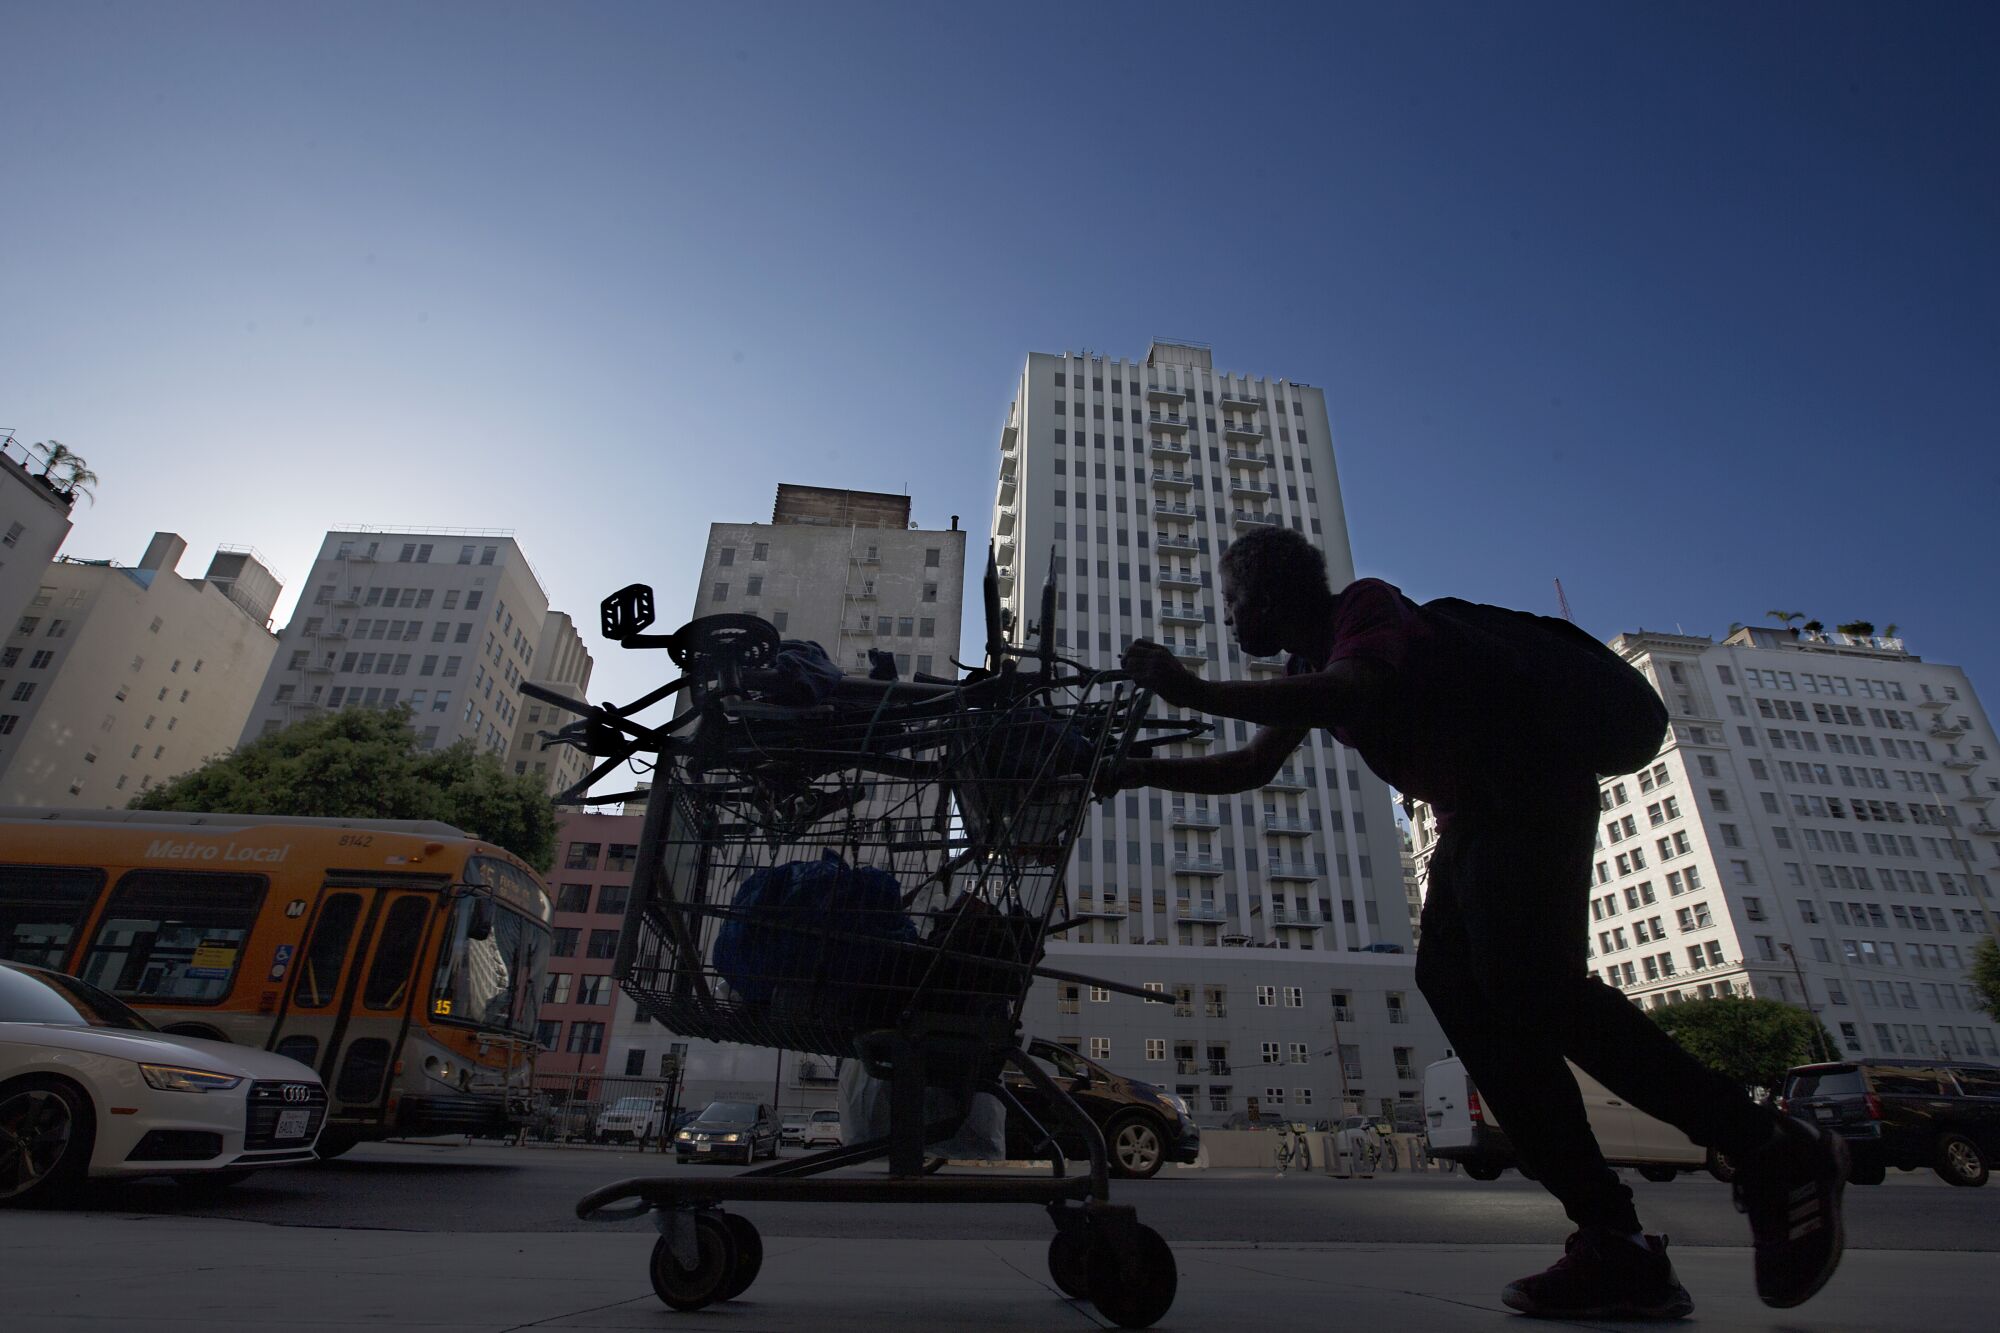 A man pushes a shopping cart along the sidewalk in the historic urban core of Los Angeles.